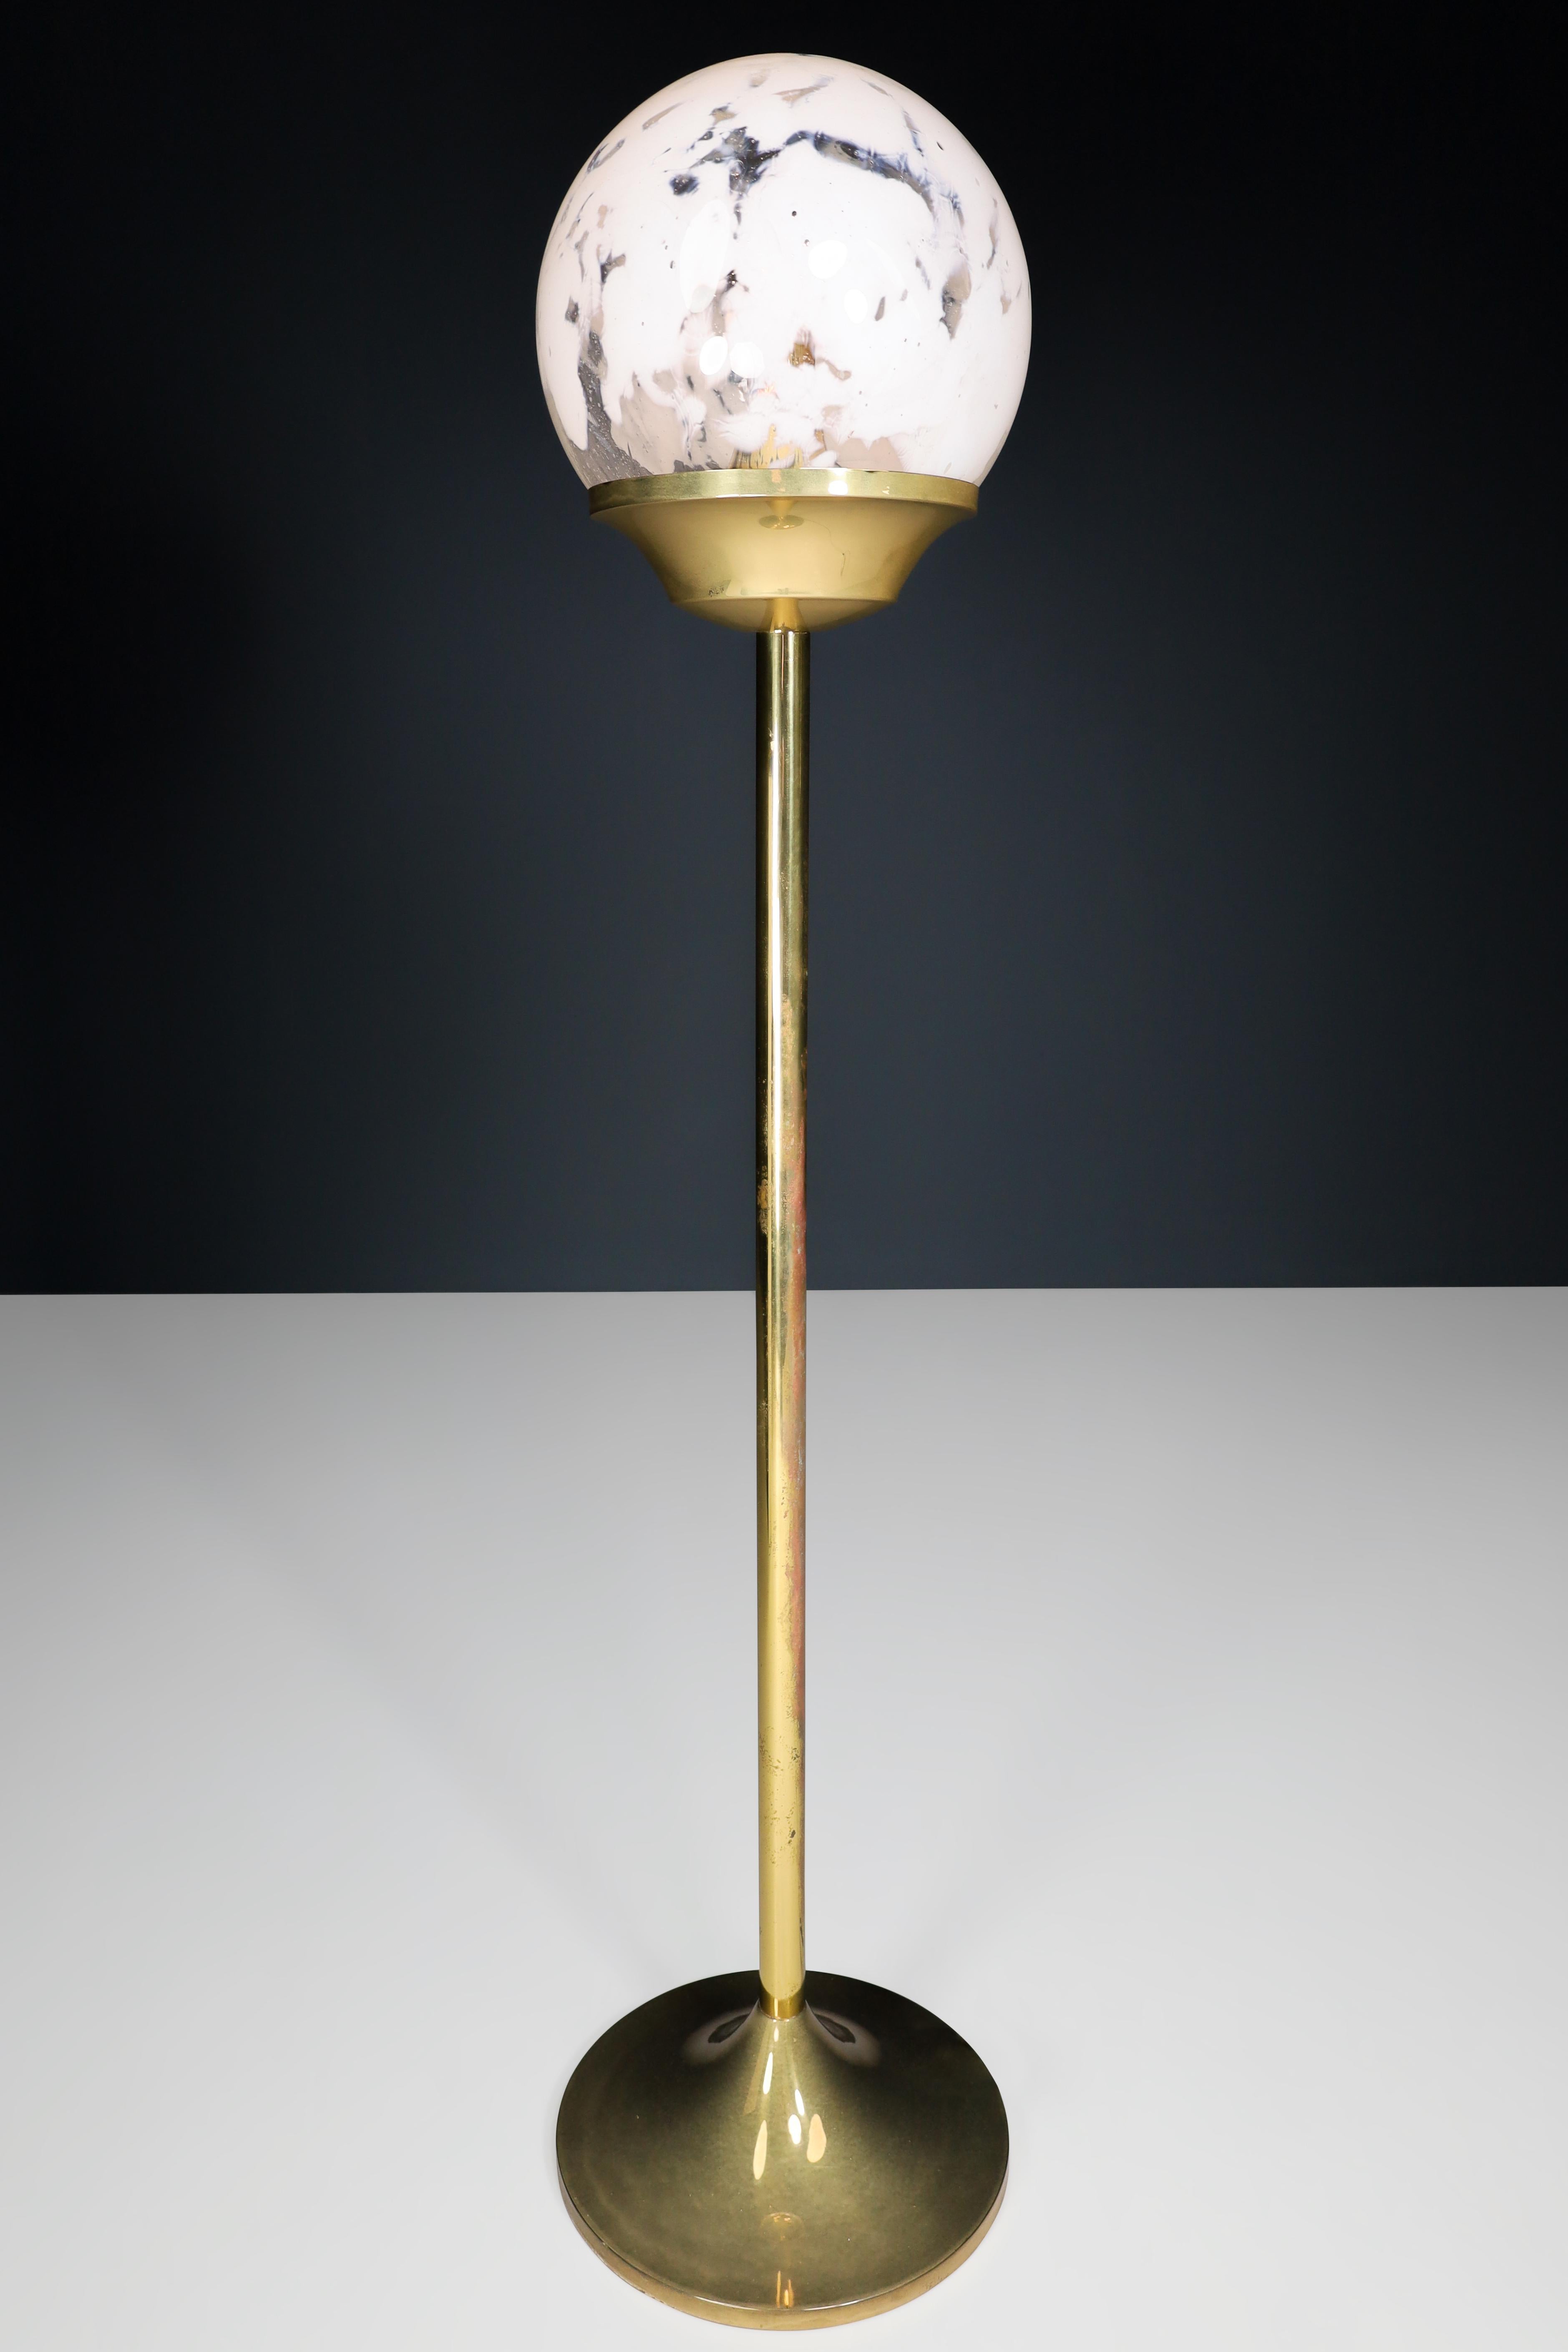 Bohemian Brass and hand-blown art-glass globe floor lamp Czech Republic 1960s

This Brass and large hand-blown art-glass globe floor lamp is a stunning addition to any interior. The clear hand-blown glass globes featured beautiful white streaks